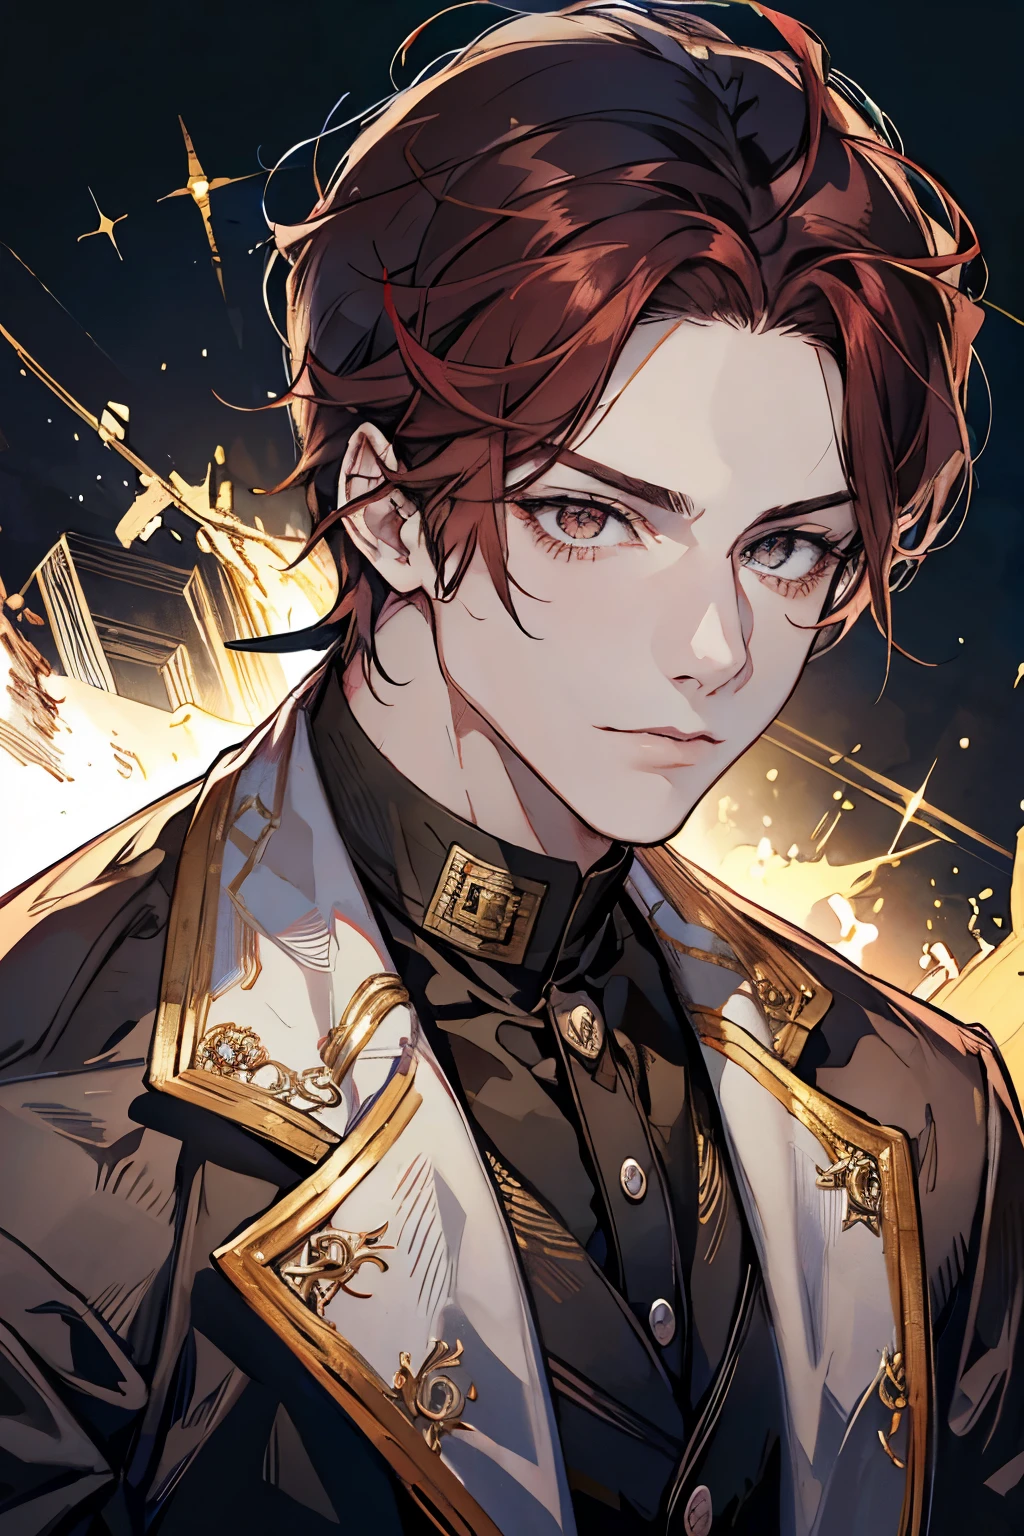 [[[very detailed face]]],[[[ detailed face]]] [[[very muscular]]], [[[muscular]]]red hair man,very short haircut,dressed in elegant clothes,background gym,broad shouldered,very tall man, black formal suit